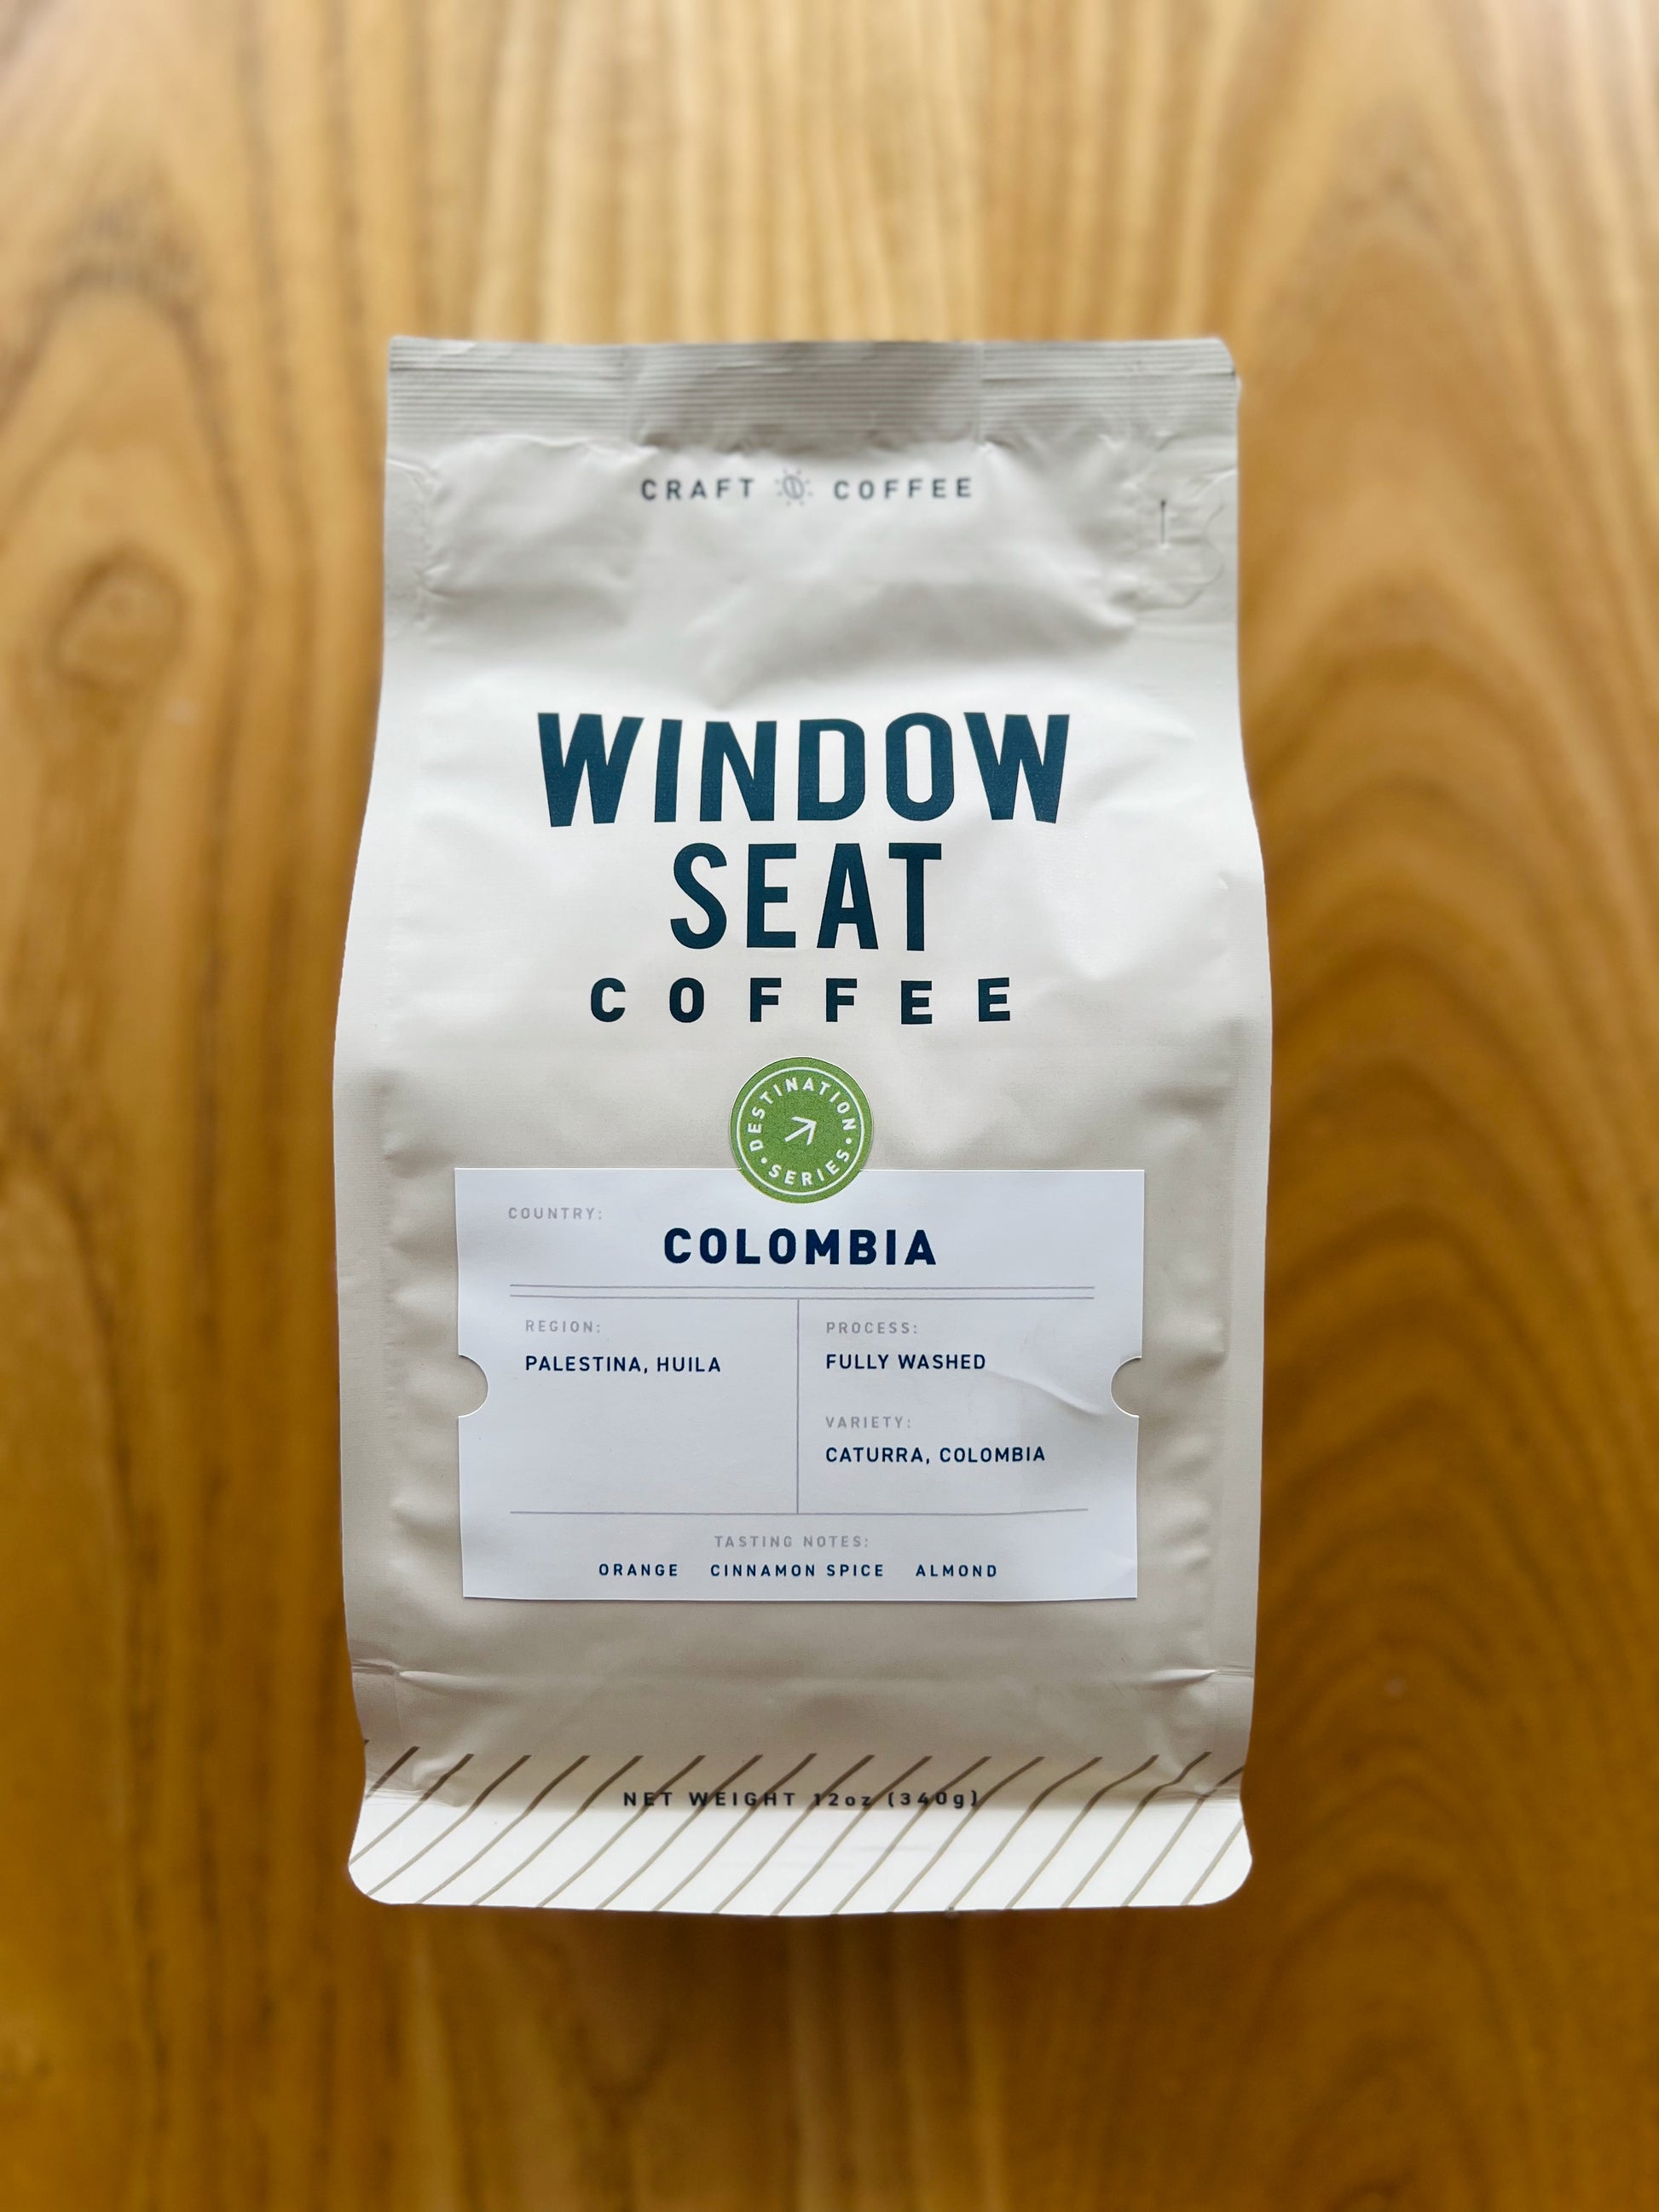 Twelve ounce bag of single-origin Colombia coffee from the Huila region. Fully washed processed with tasting notes of orange, cinnamon spice, and almond.